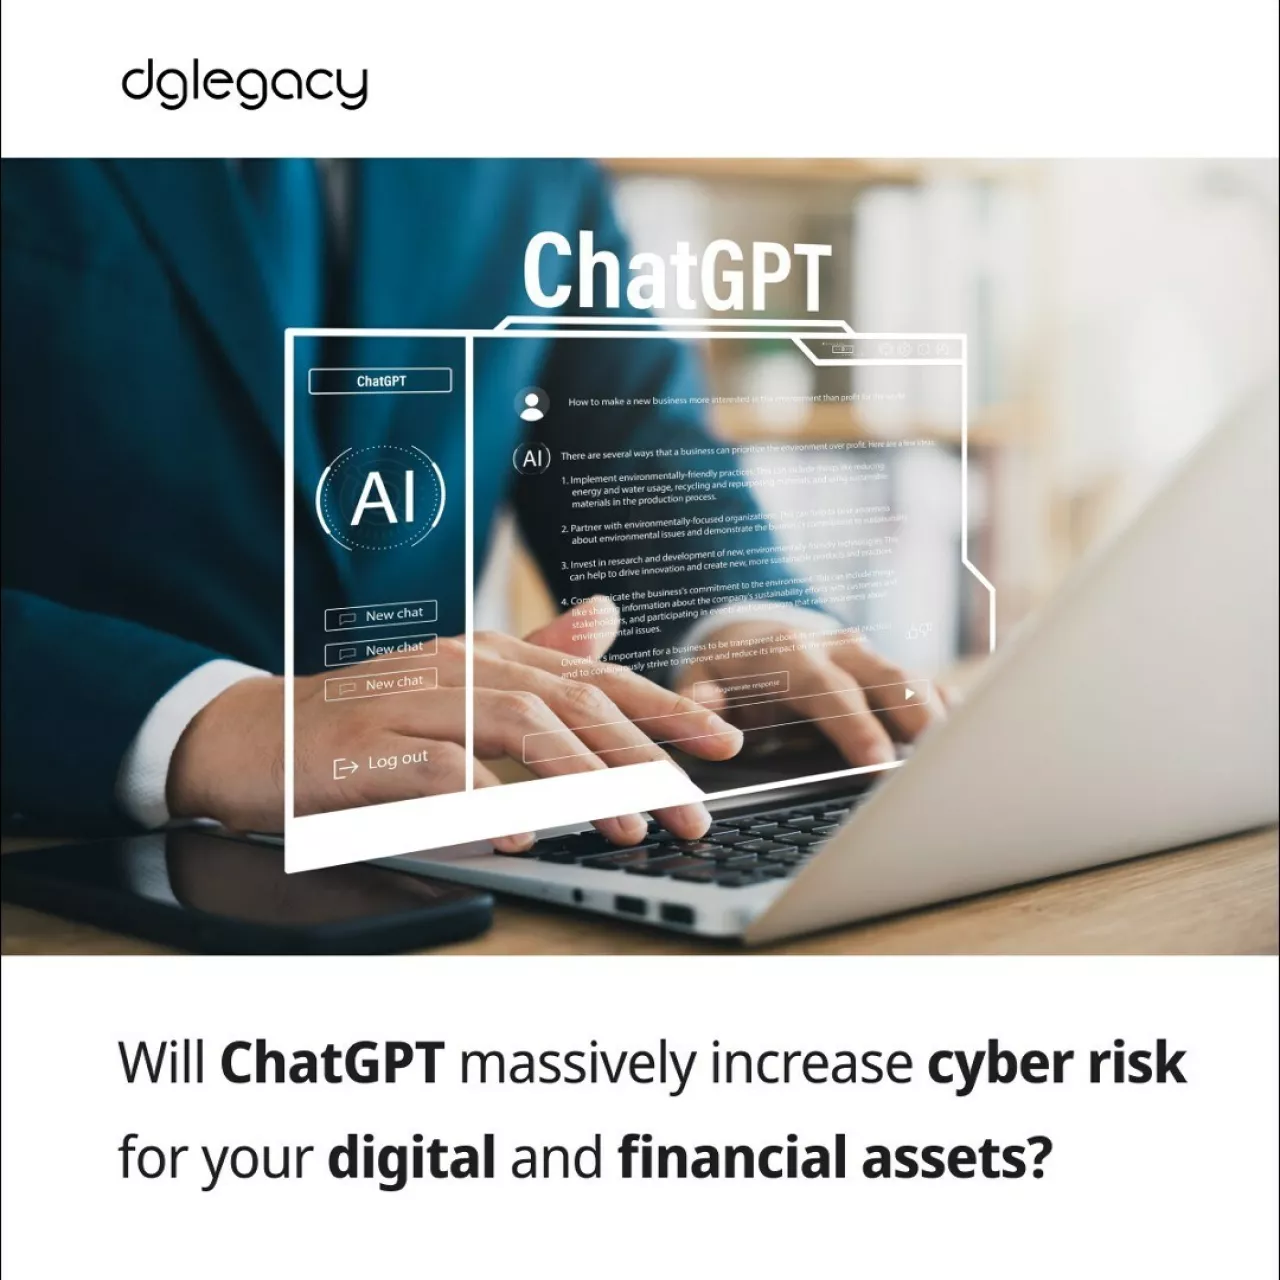 ChatGPT can massively increase the cyber risk for your digital and financial assets